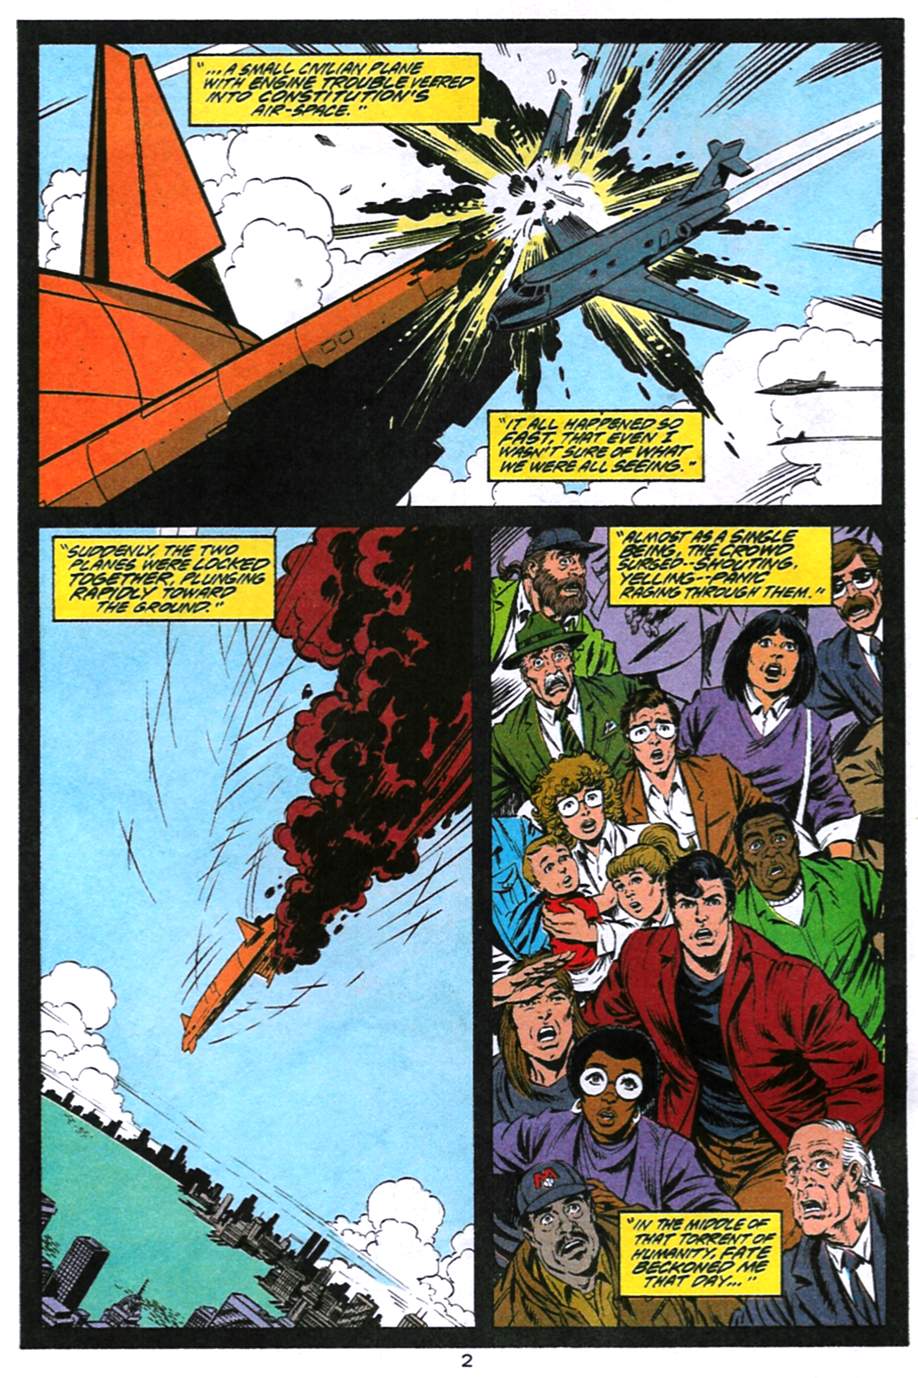 Adventures of Superman (1987) 494 Page 2